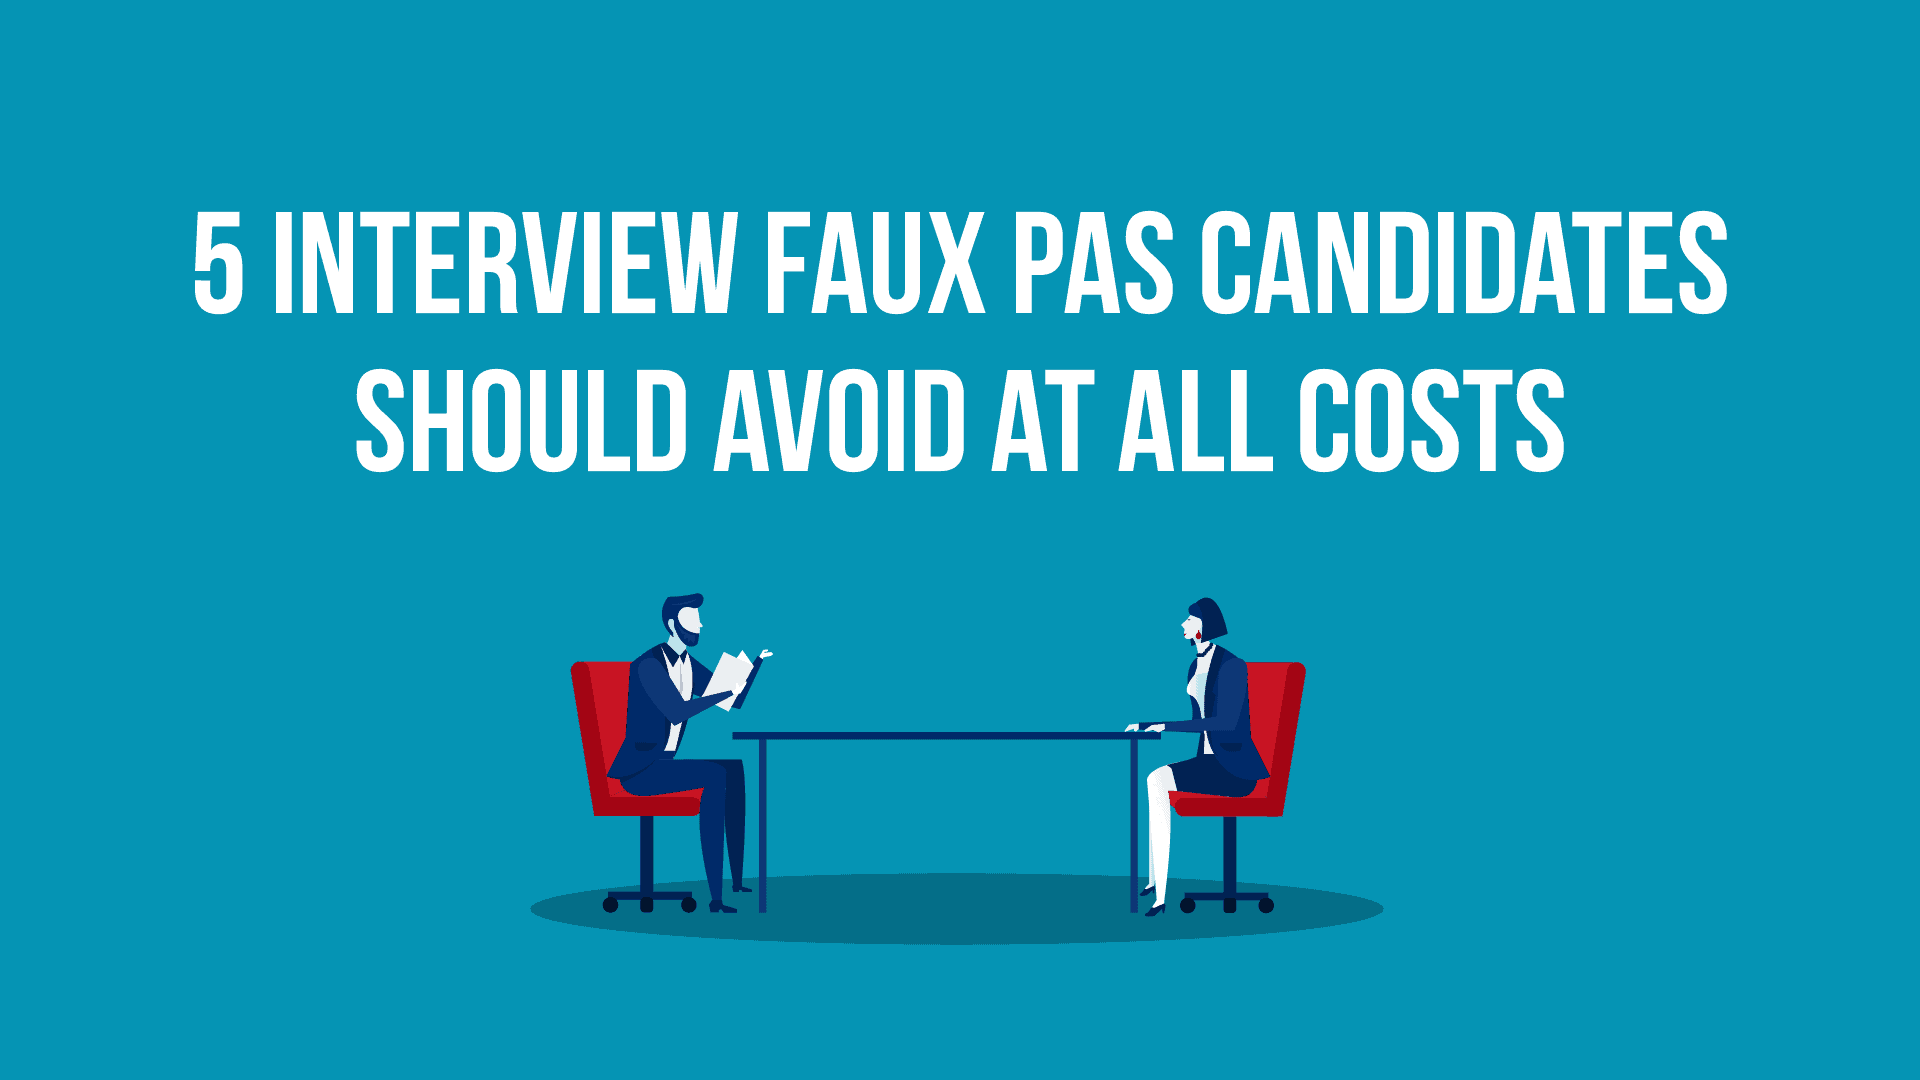 5 Interview Faux Pas Candidates Should Avoid at All Costs